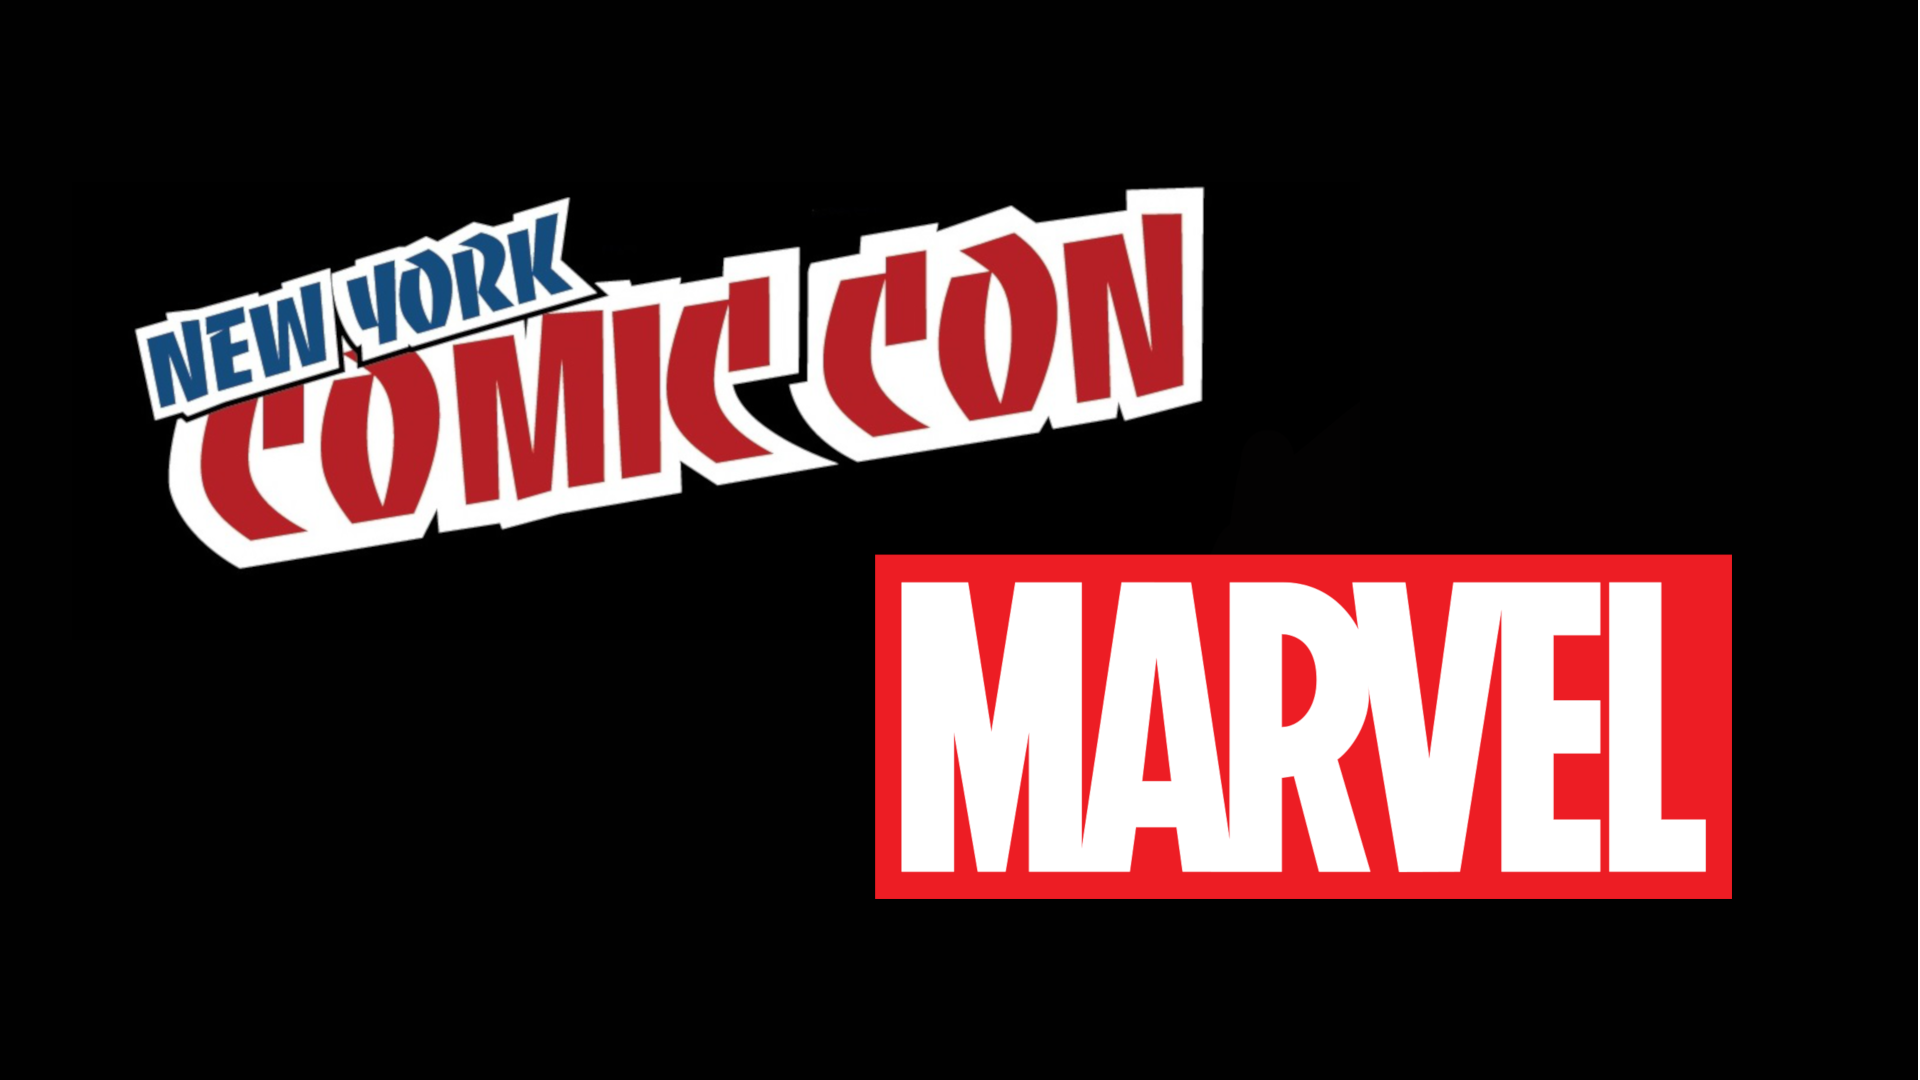 Marvel has announced their New York Comic Con Exclusives! HiDef